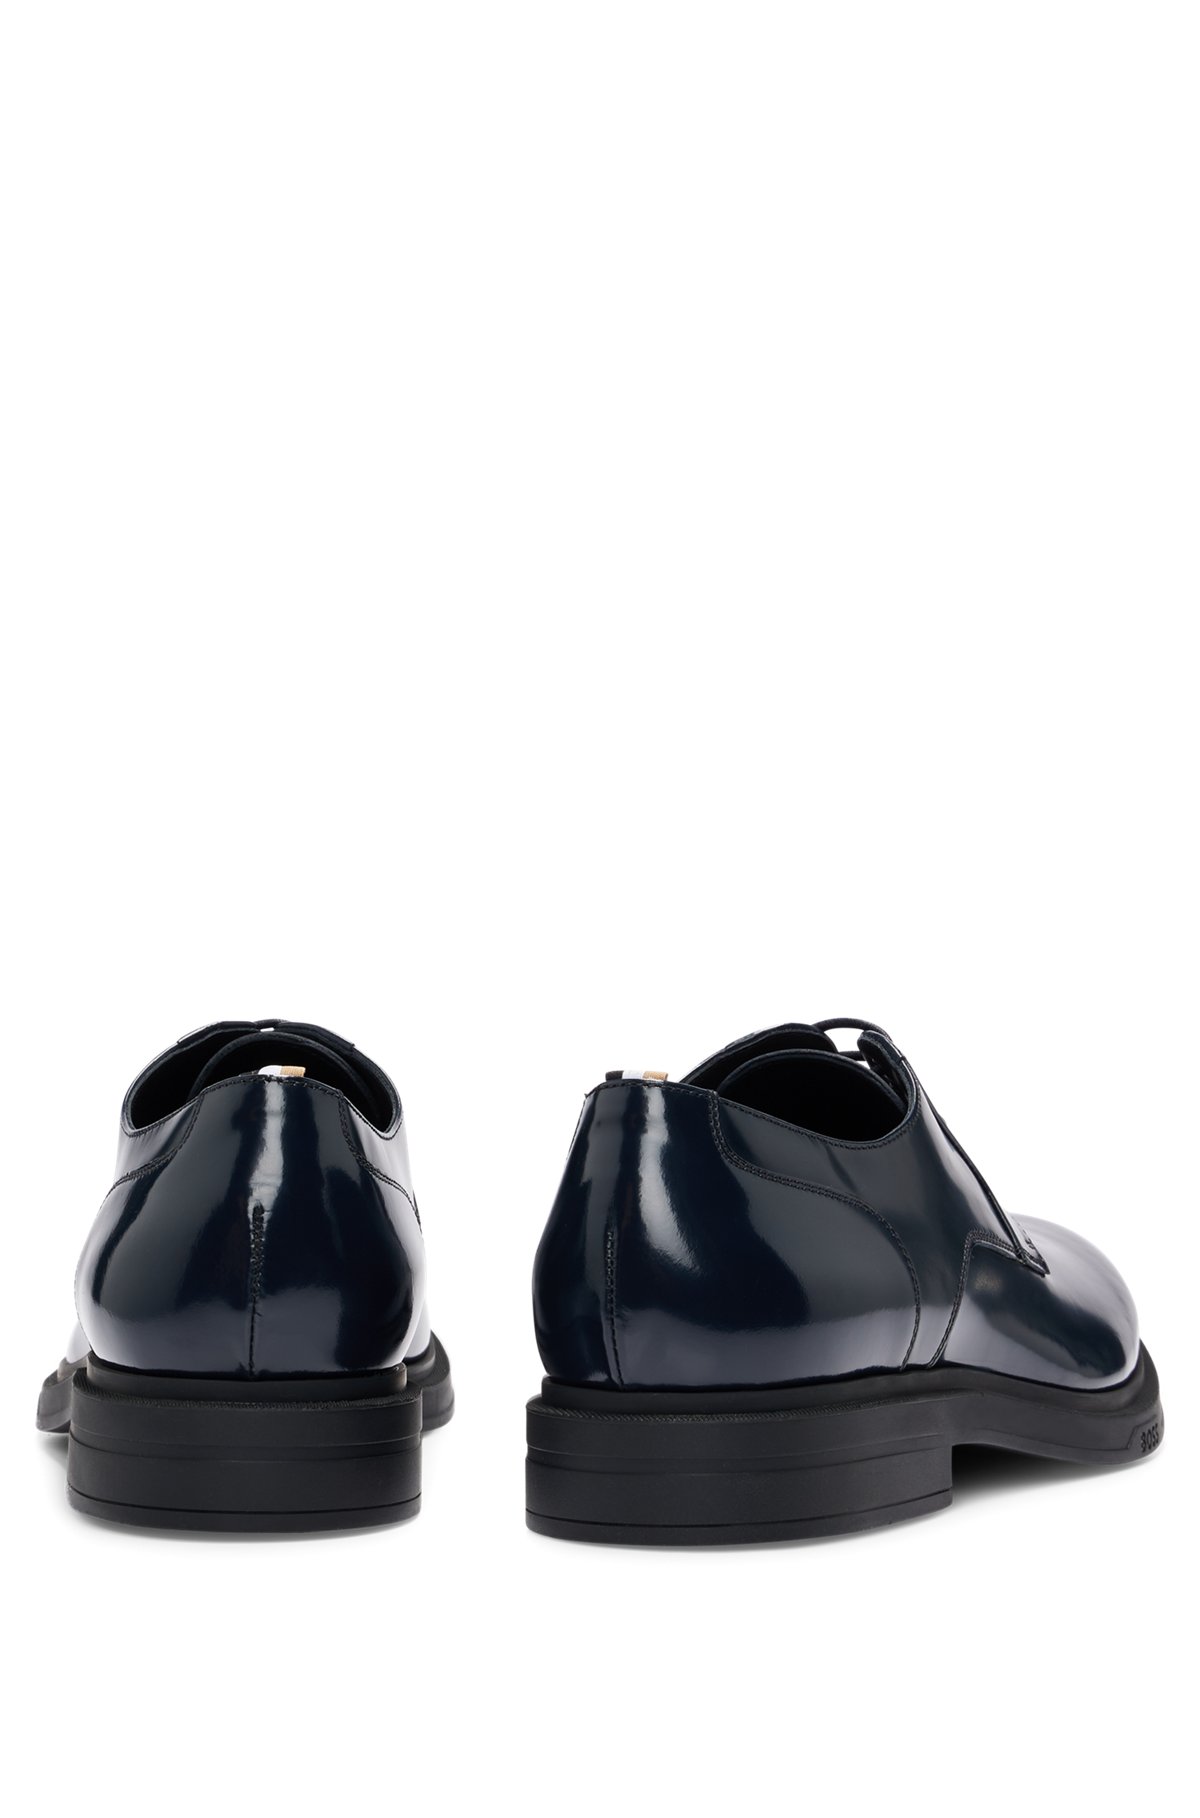 Derby shoes in brush-off leather, Dark Blue